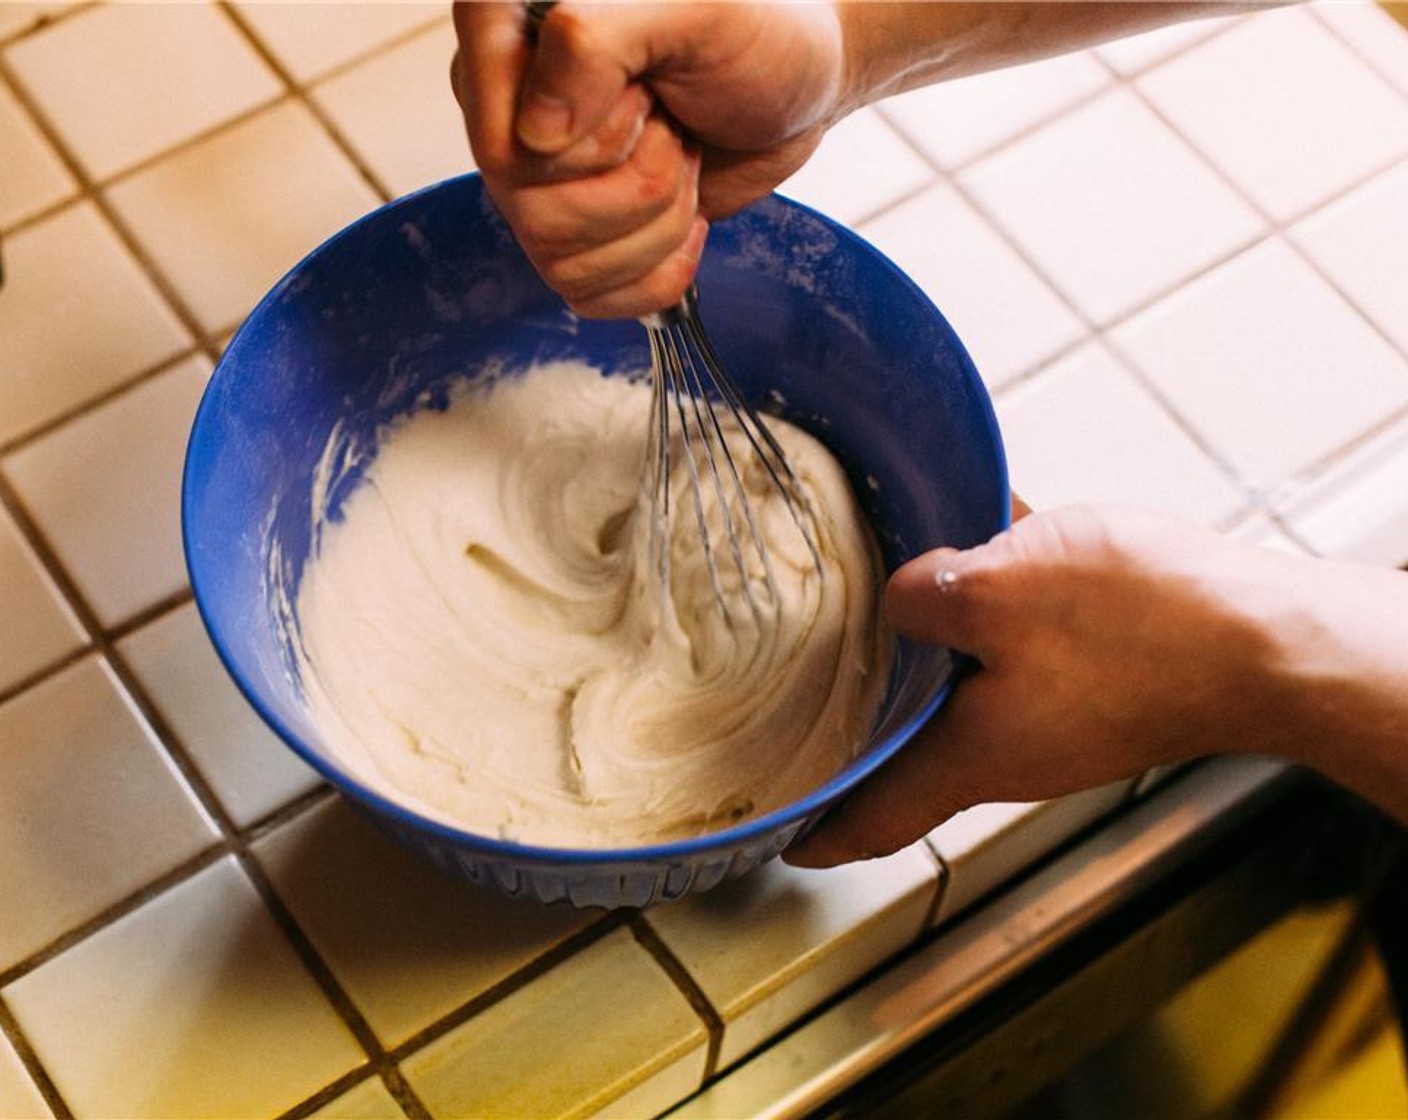 step 5 Add 1/3 of the flour mixture to the butter and briefly mix to combine, followed by 1/2 of the liquid. Continue to alternately add remaining flour and liquid and mix until combined, taking care not to over-mix the batter.